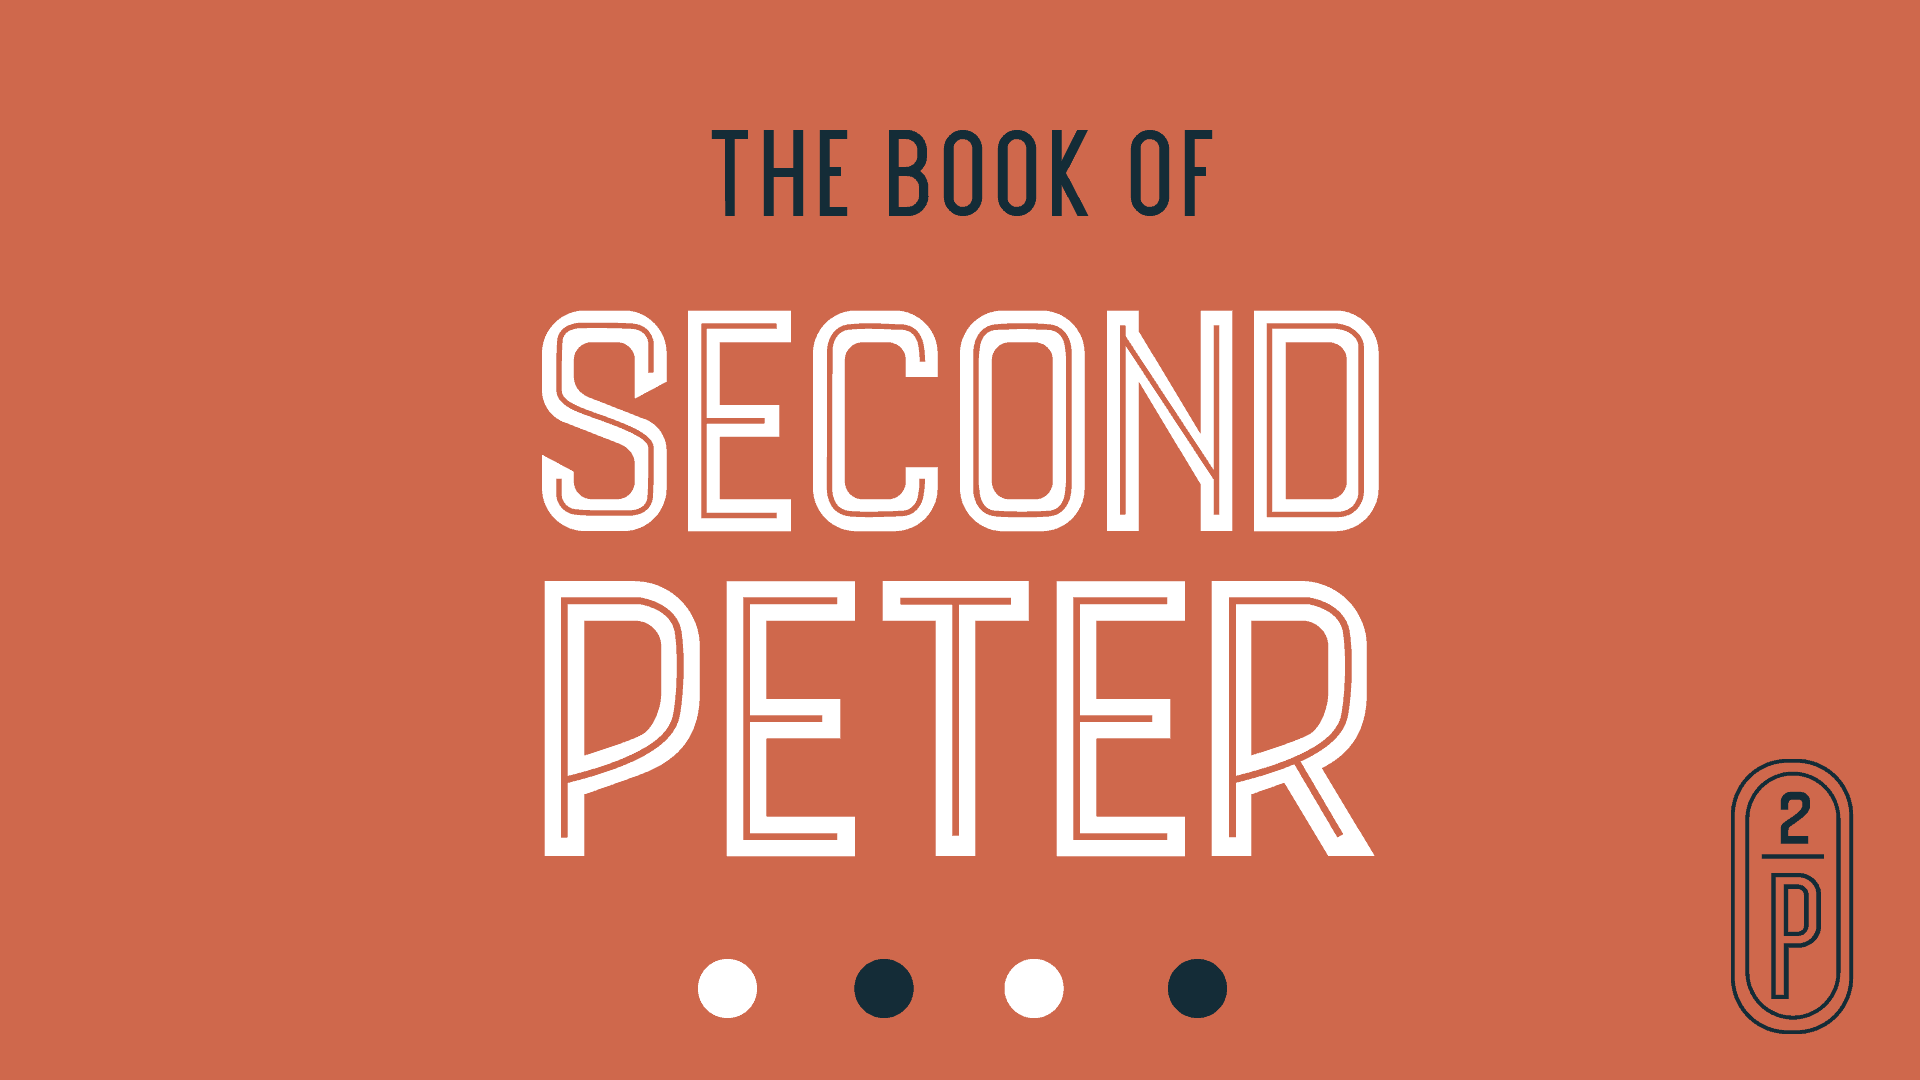 second Peter-01